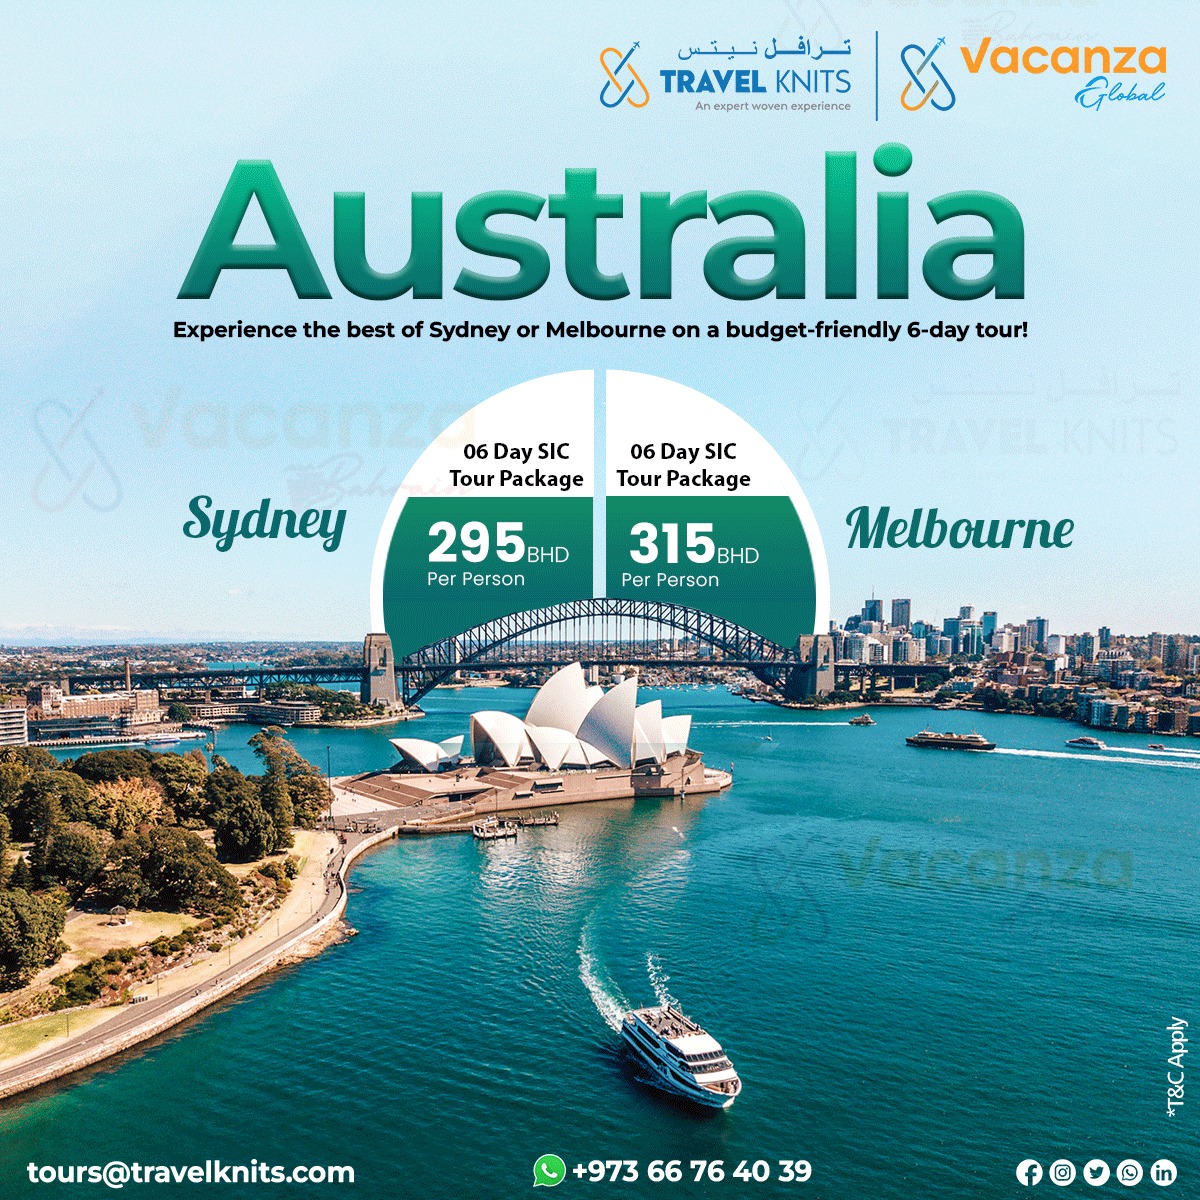 Sydney packageTour Packages - Book honeymoon ,family,adventure tour packages to Sydney package|Travel Knits